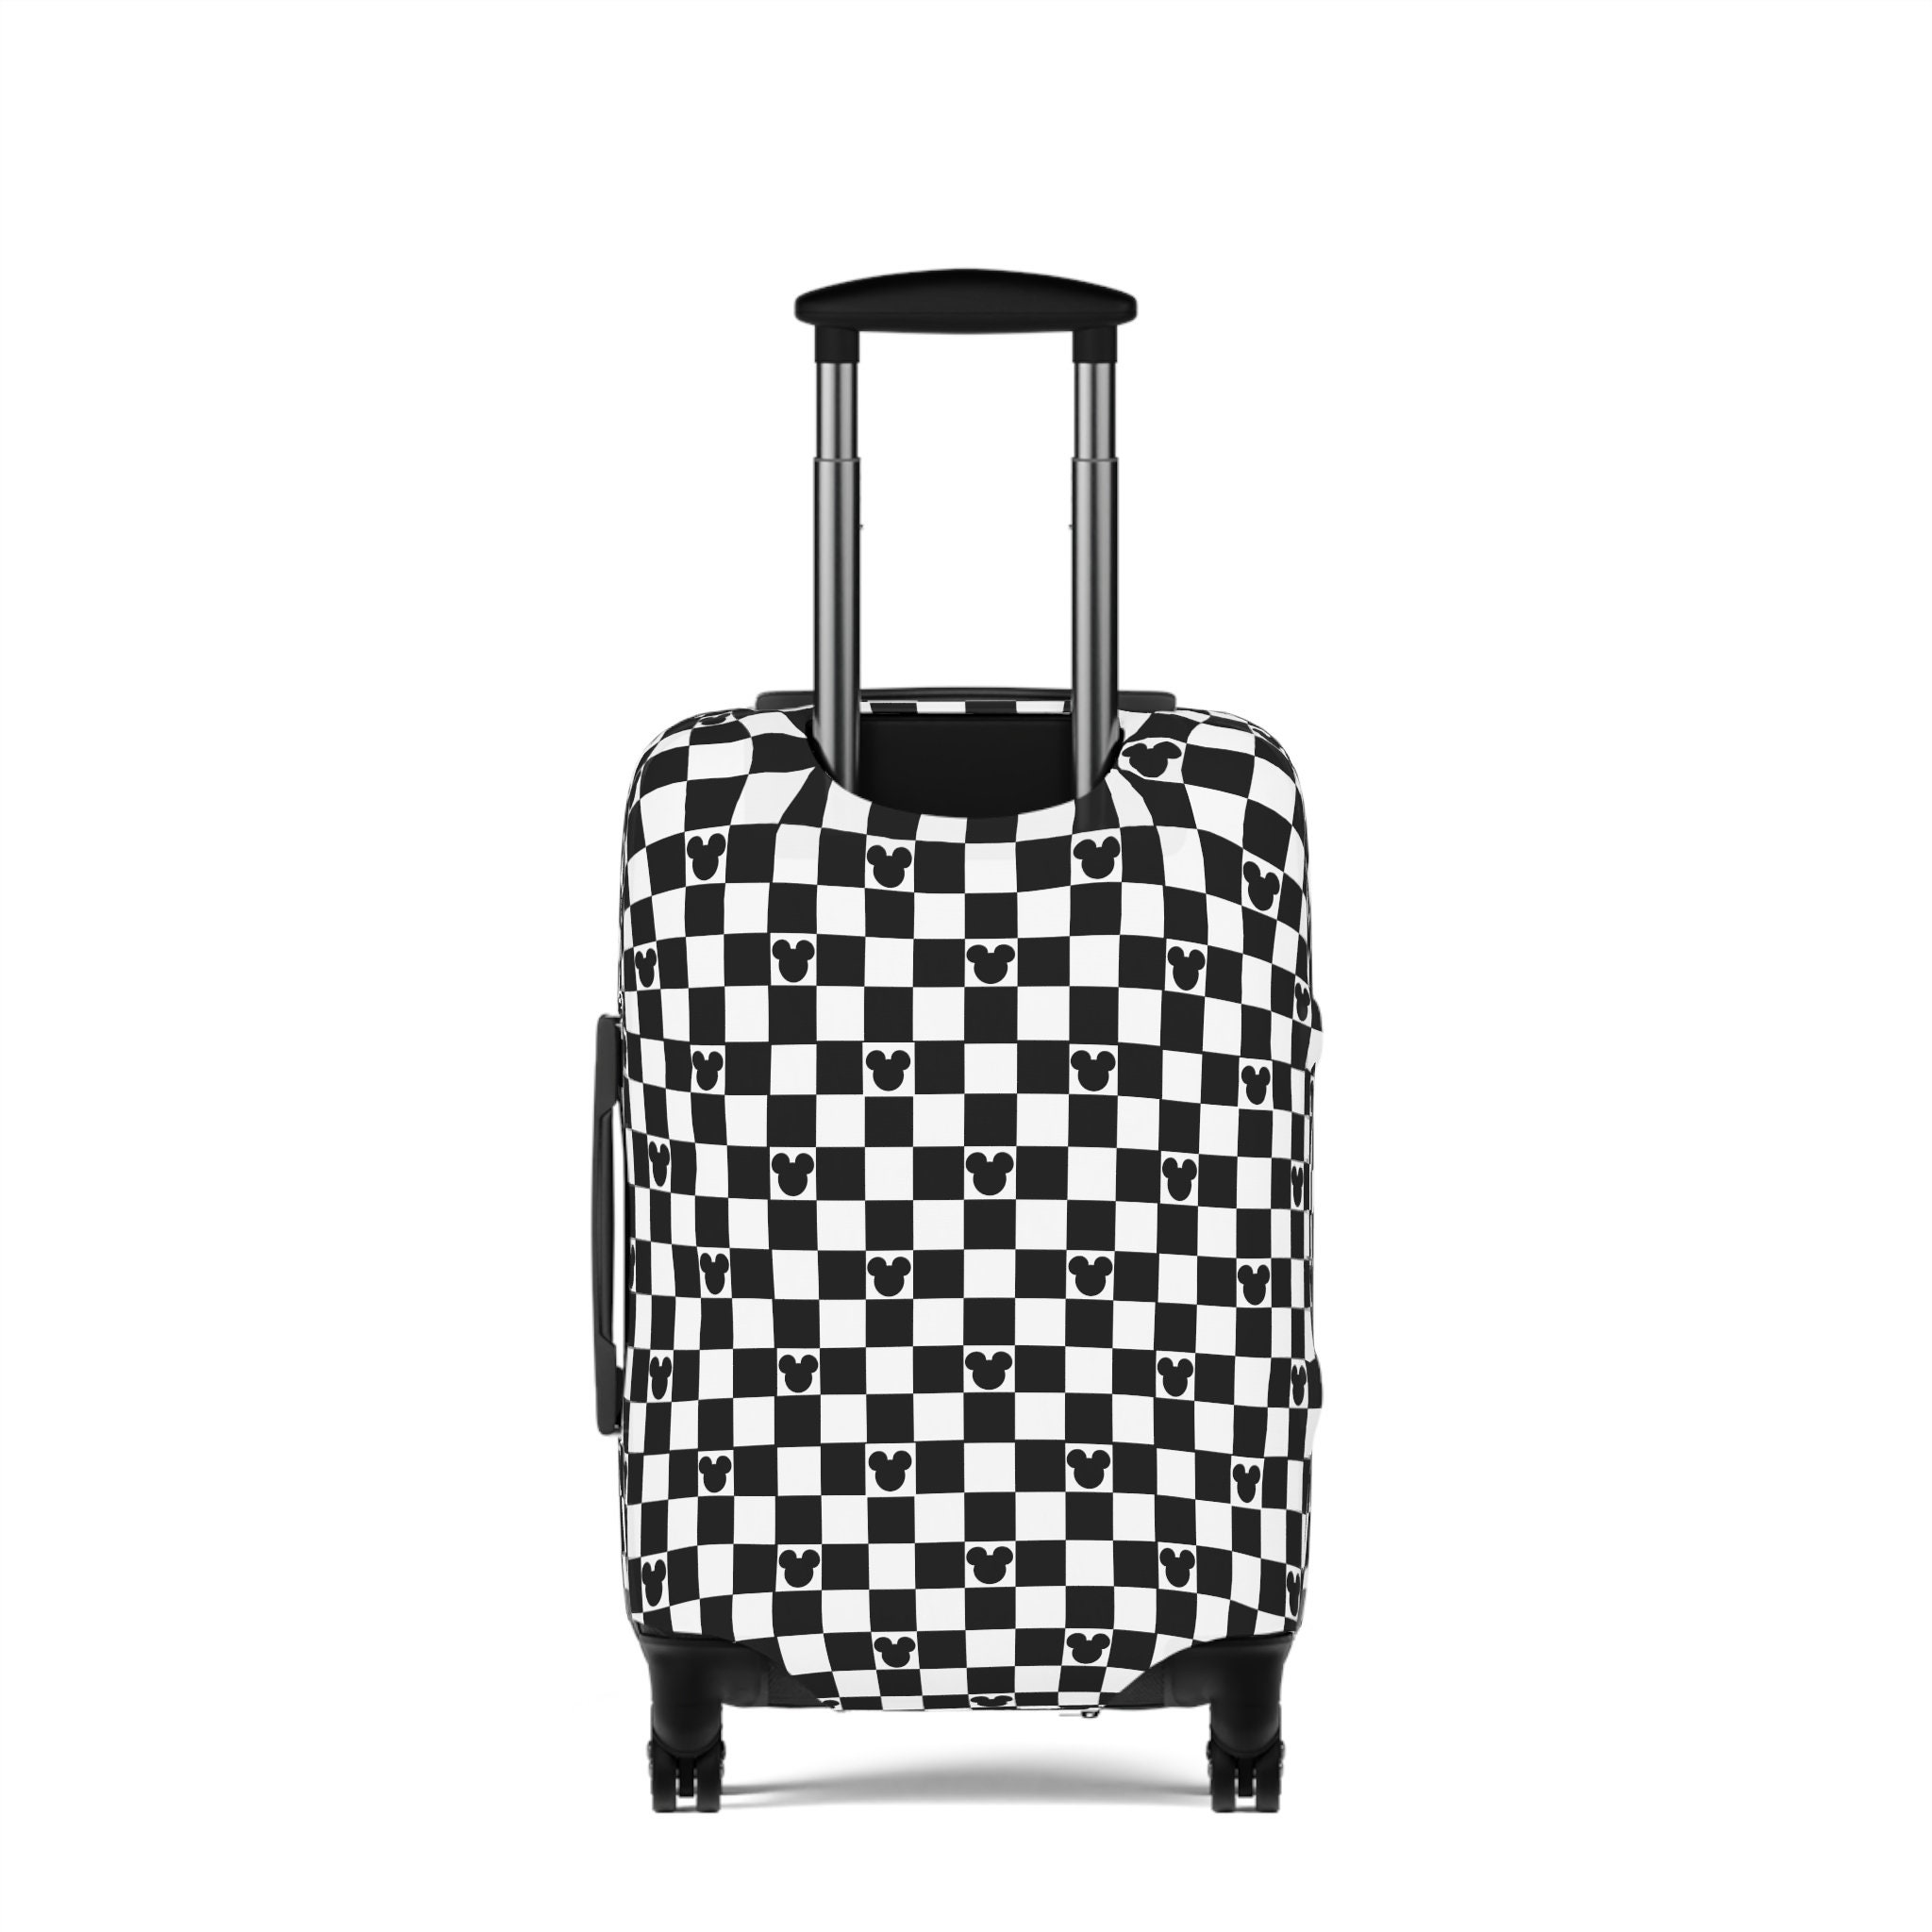 Disney Luggage COVER, Vacation Cover, mickey checkered cover